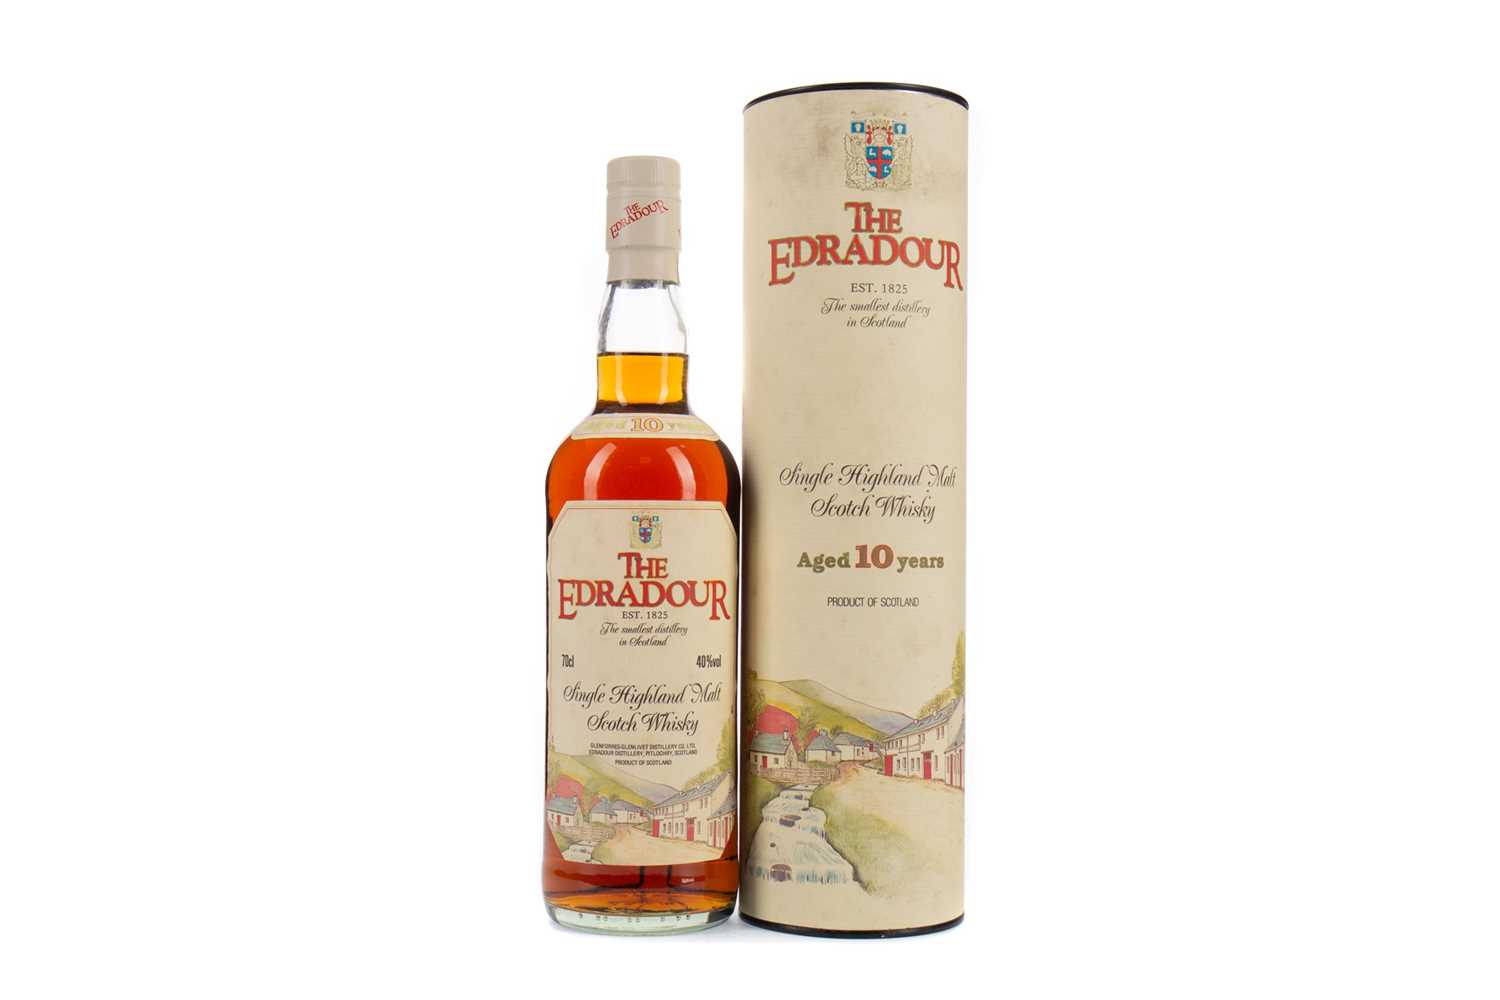 Lot 102 - EDRADOUR AGED 10 YEARS